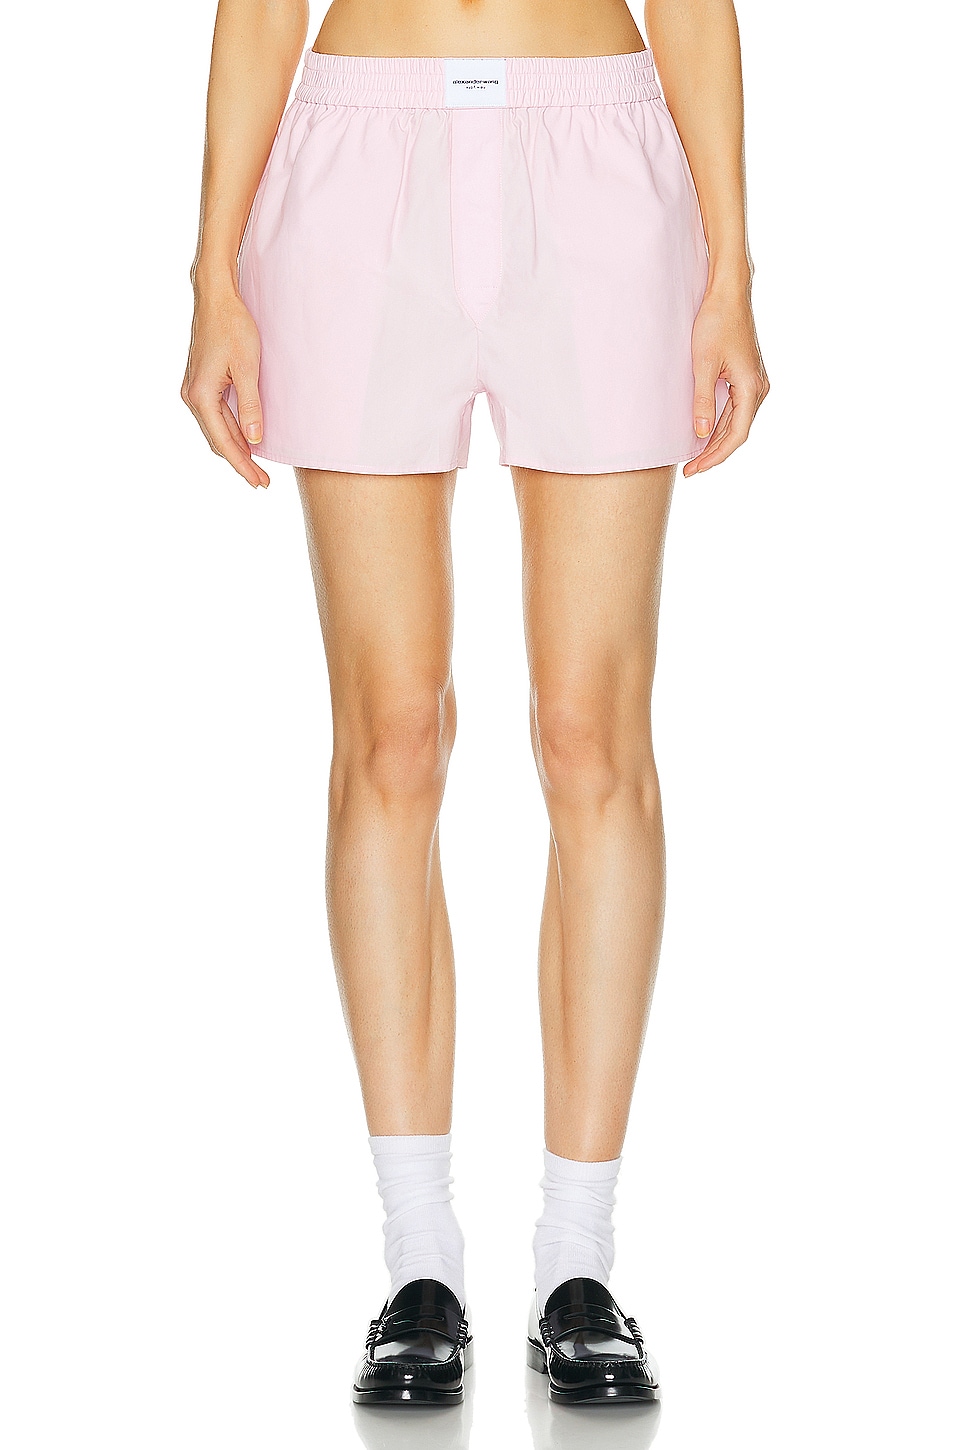 Image 1 of Alexander Wang Classic Boxer Short in Light Pink